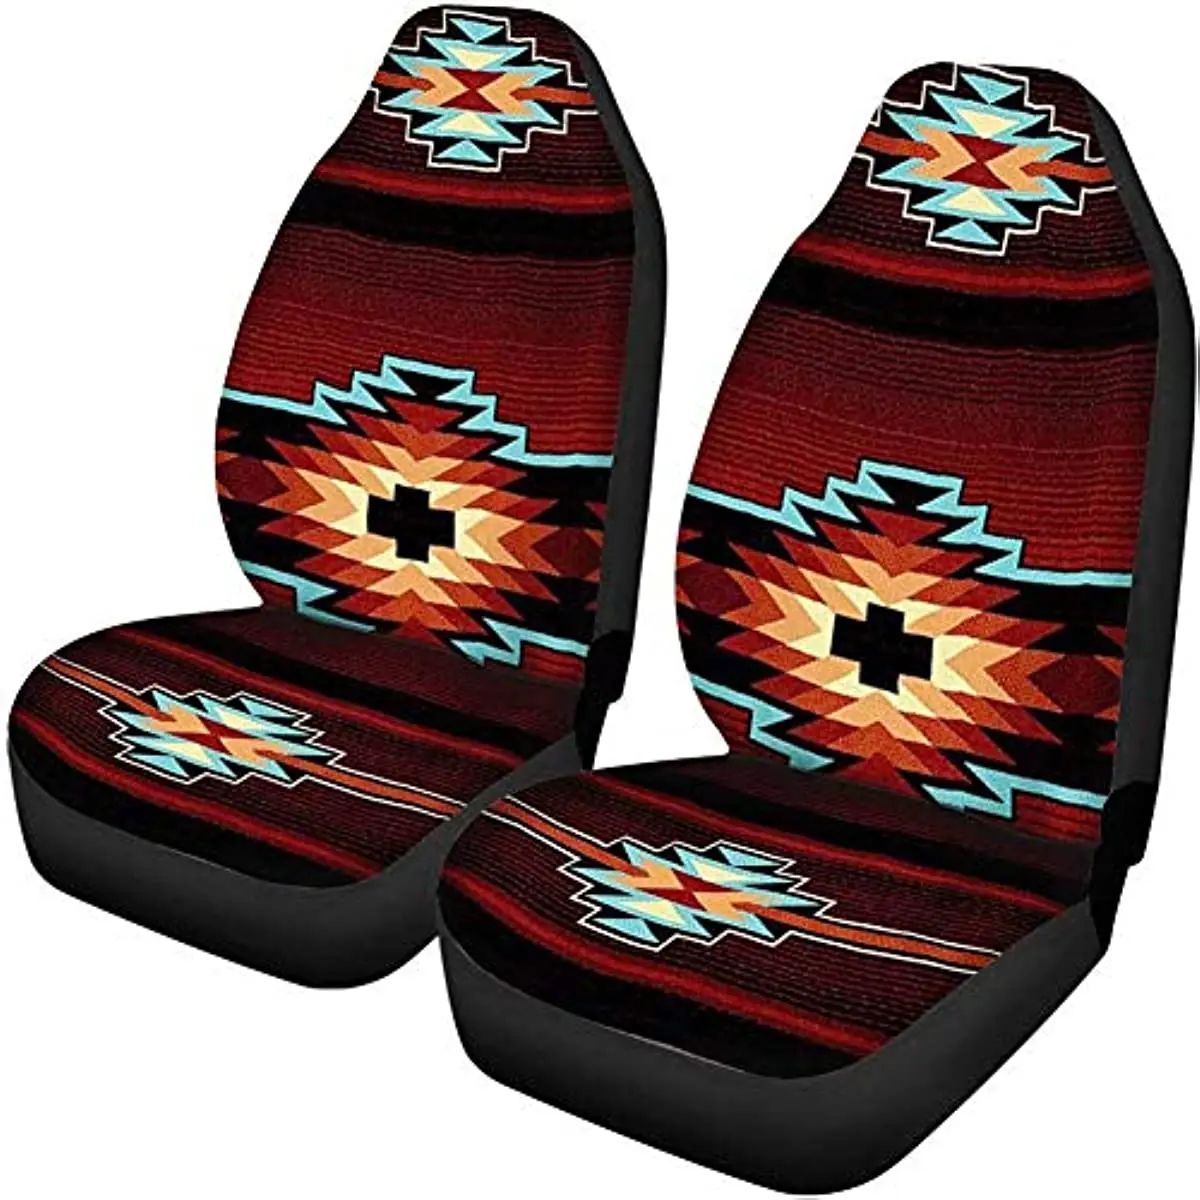 

Southwest Nativa American Tribal Aztec Geometry Red Car Seat Cover,Universal 2 Pcs Car Front Seat Covers Southwestern